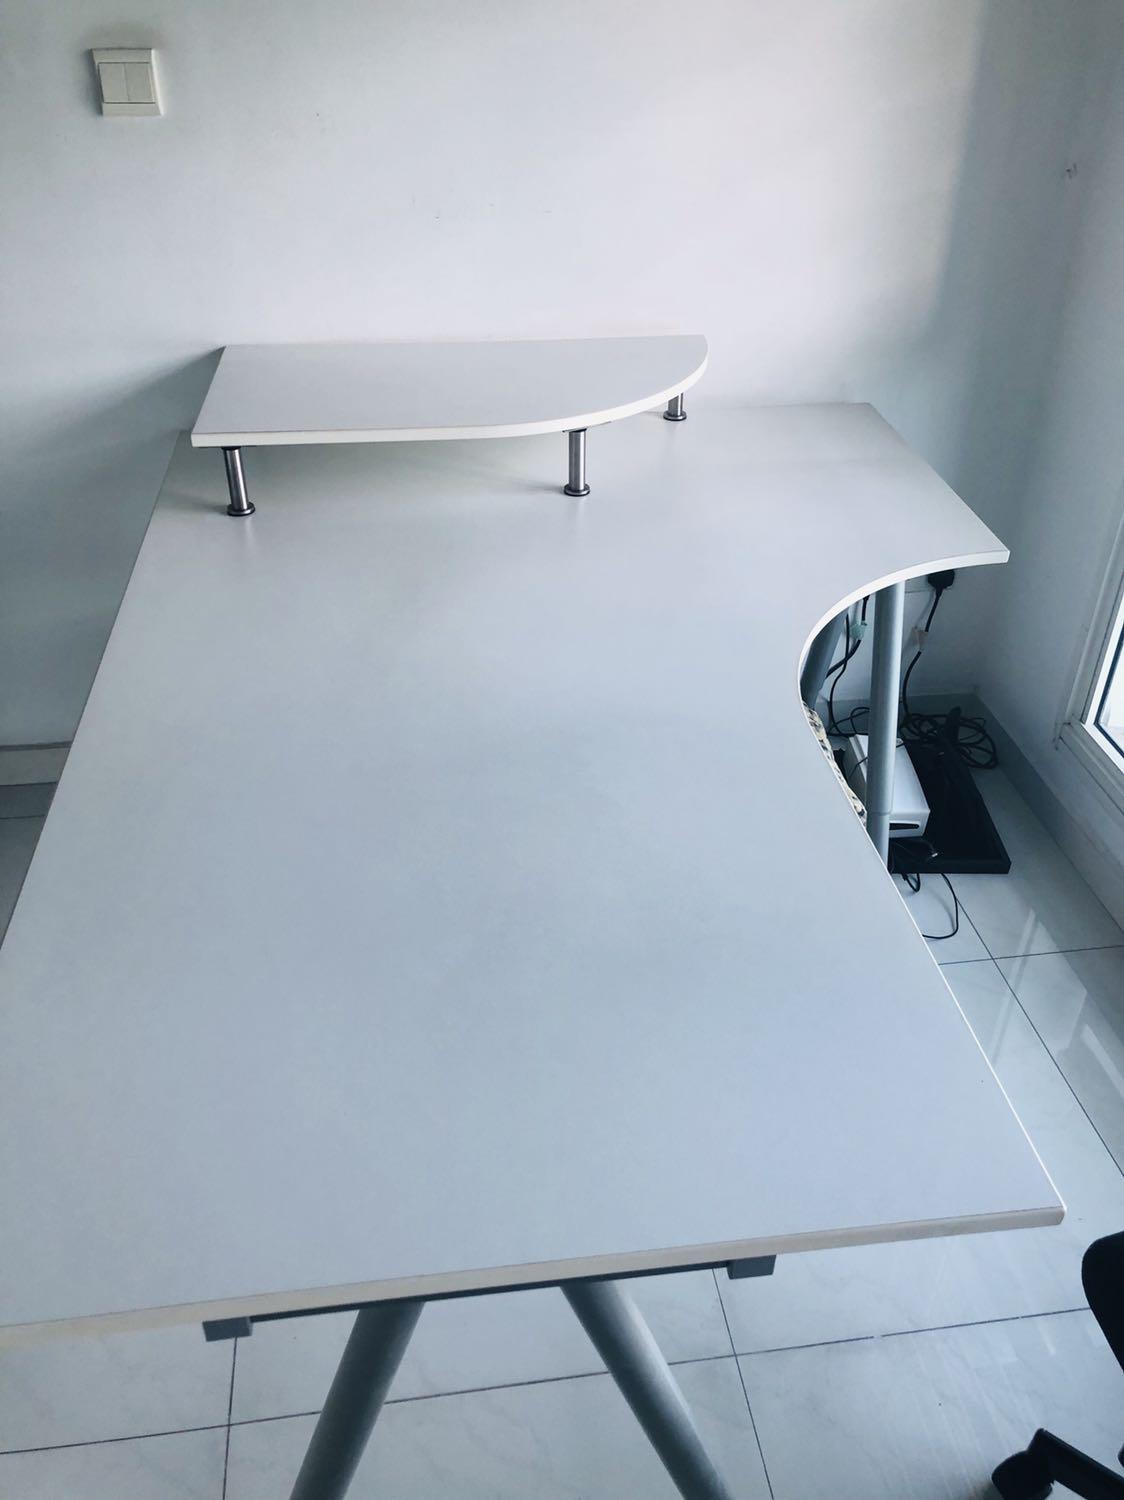 Ikea Big Desk For Sale Furniture Tables Chairs On Carousell